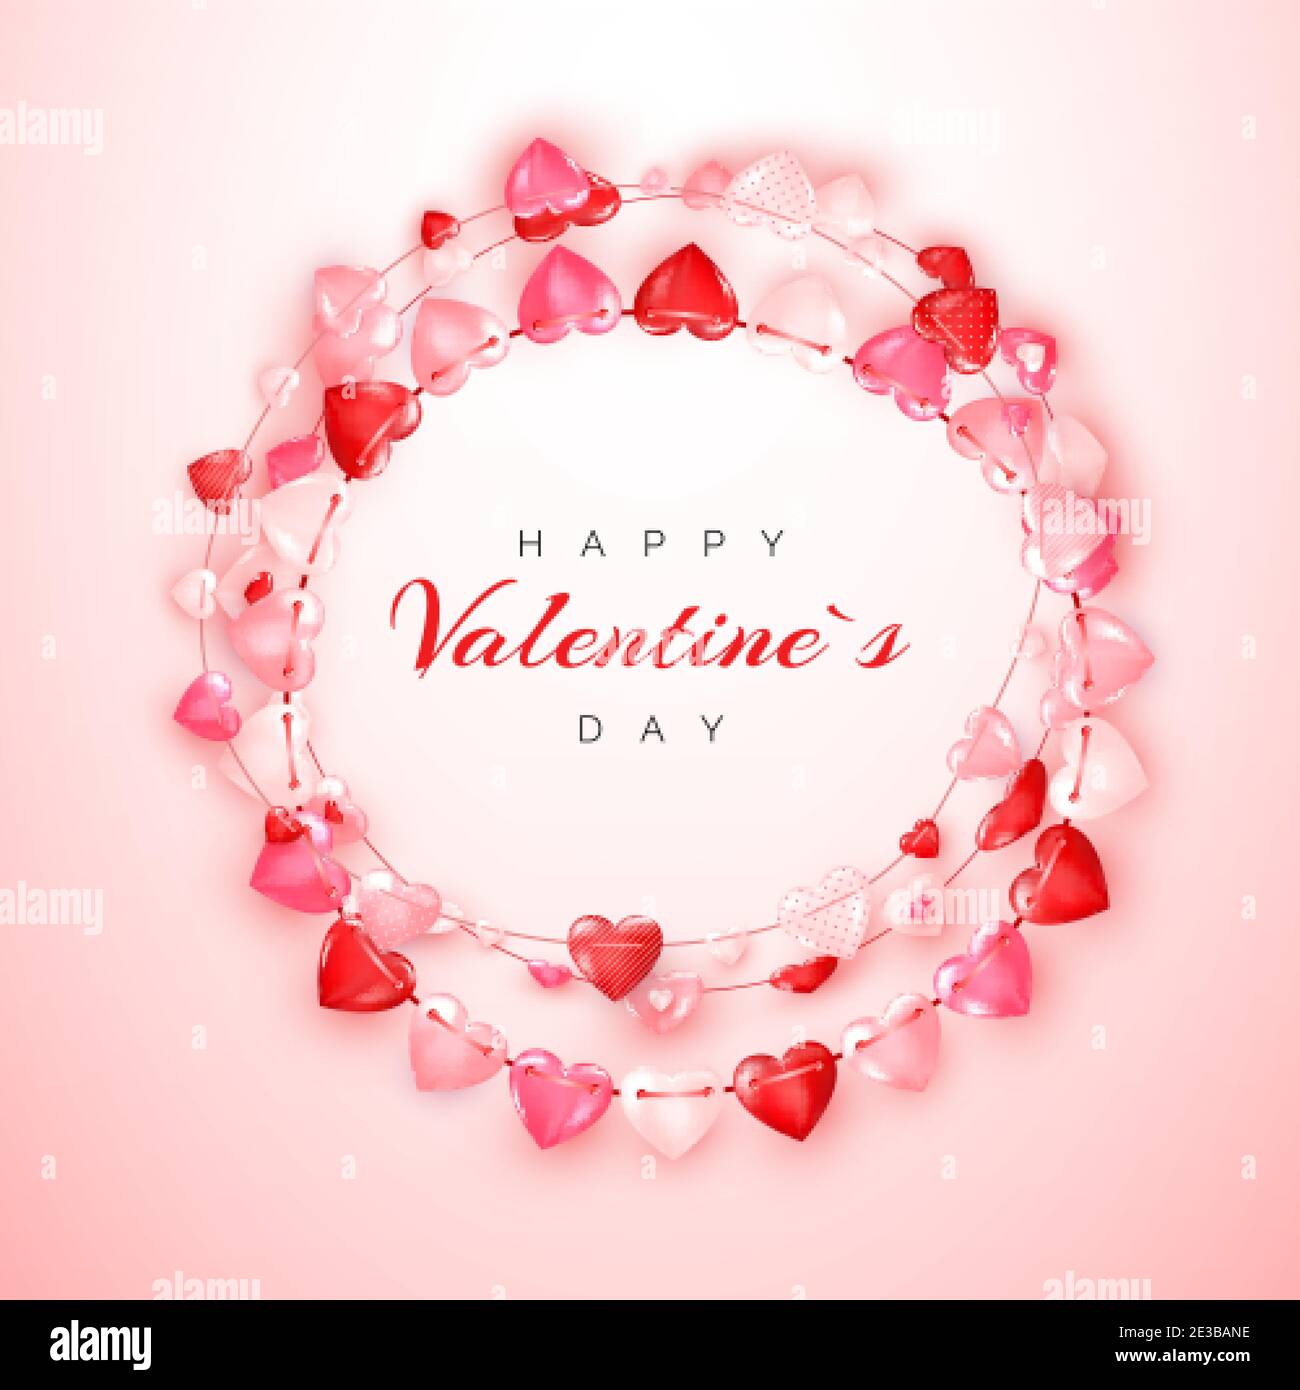 Valentine's day greeting card template with text and decoration garland of hearts. Vector Stock Vector